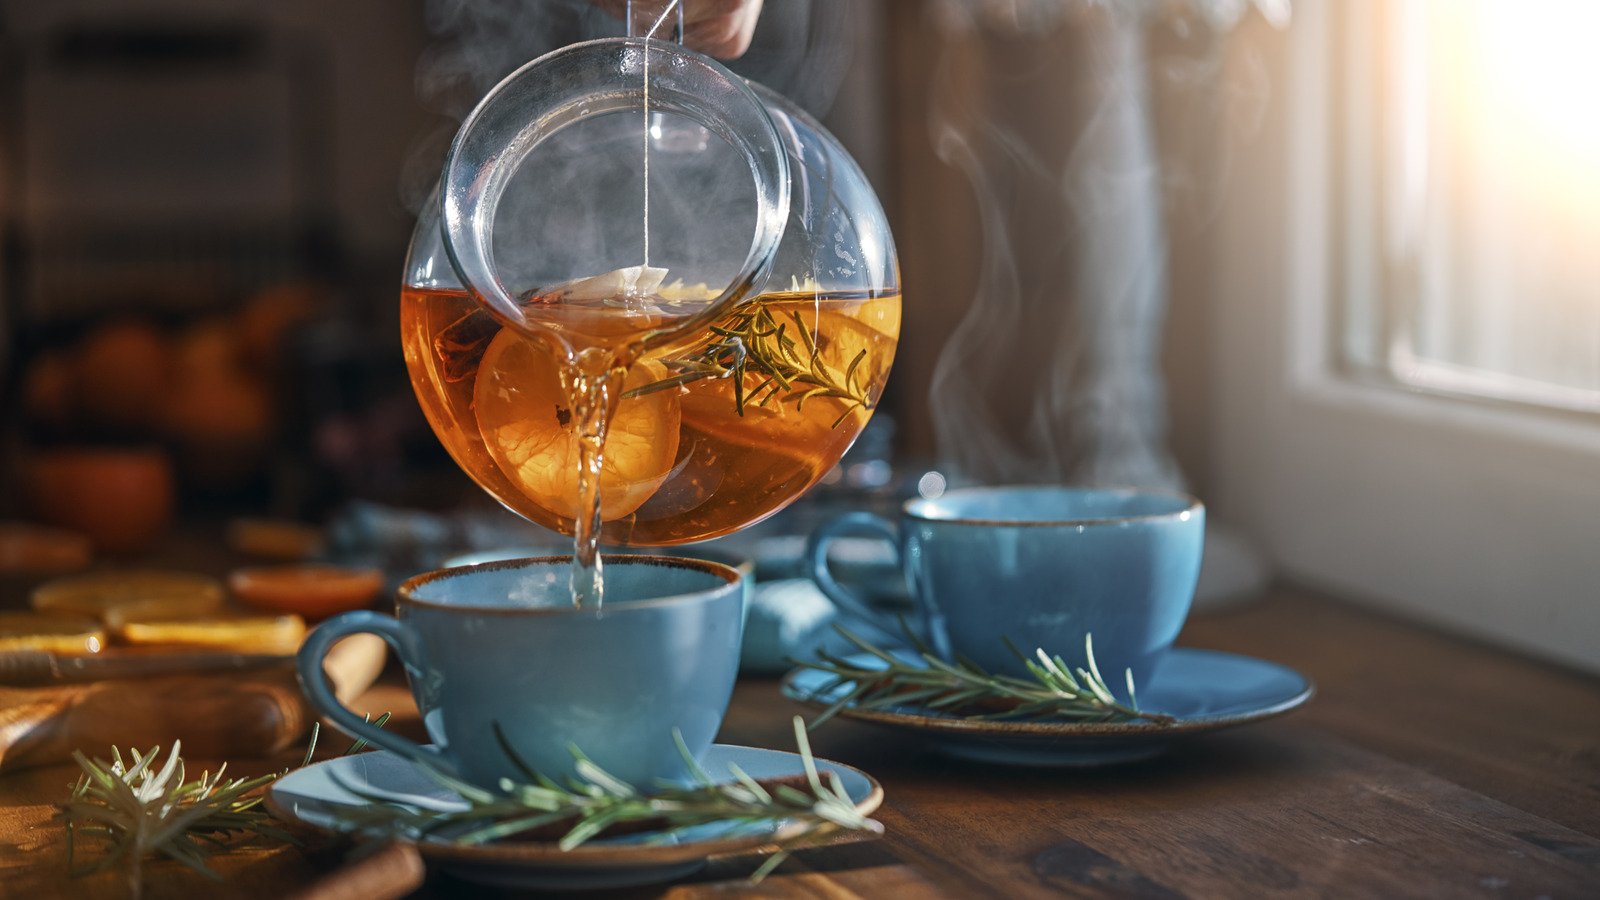 https://www.thedailymeal.com/img/gallery/12-mistakes-you-might-be-making-when-brewing-tea/l-intro-1698496475.jpg